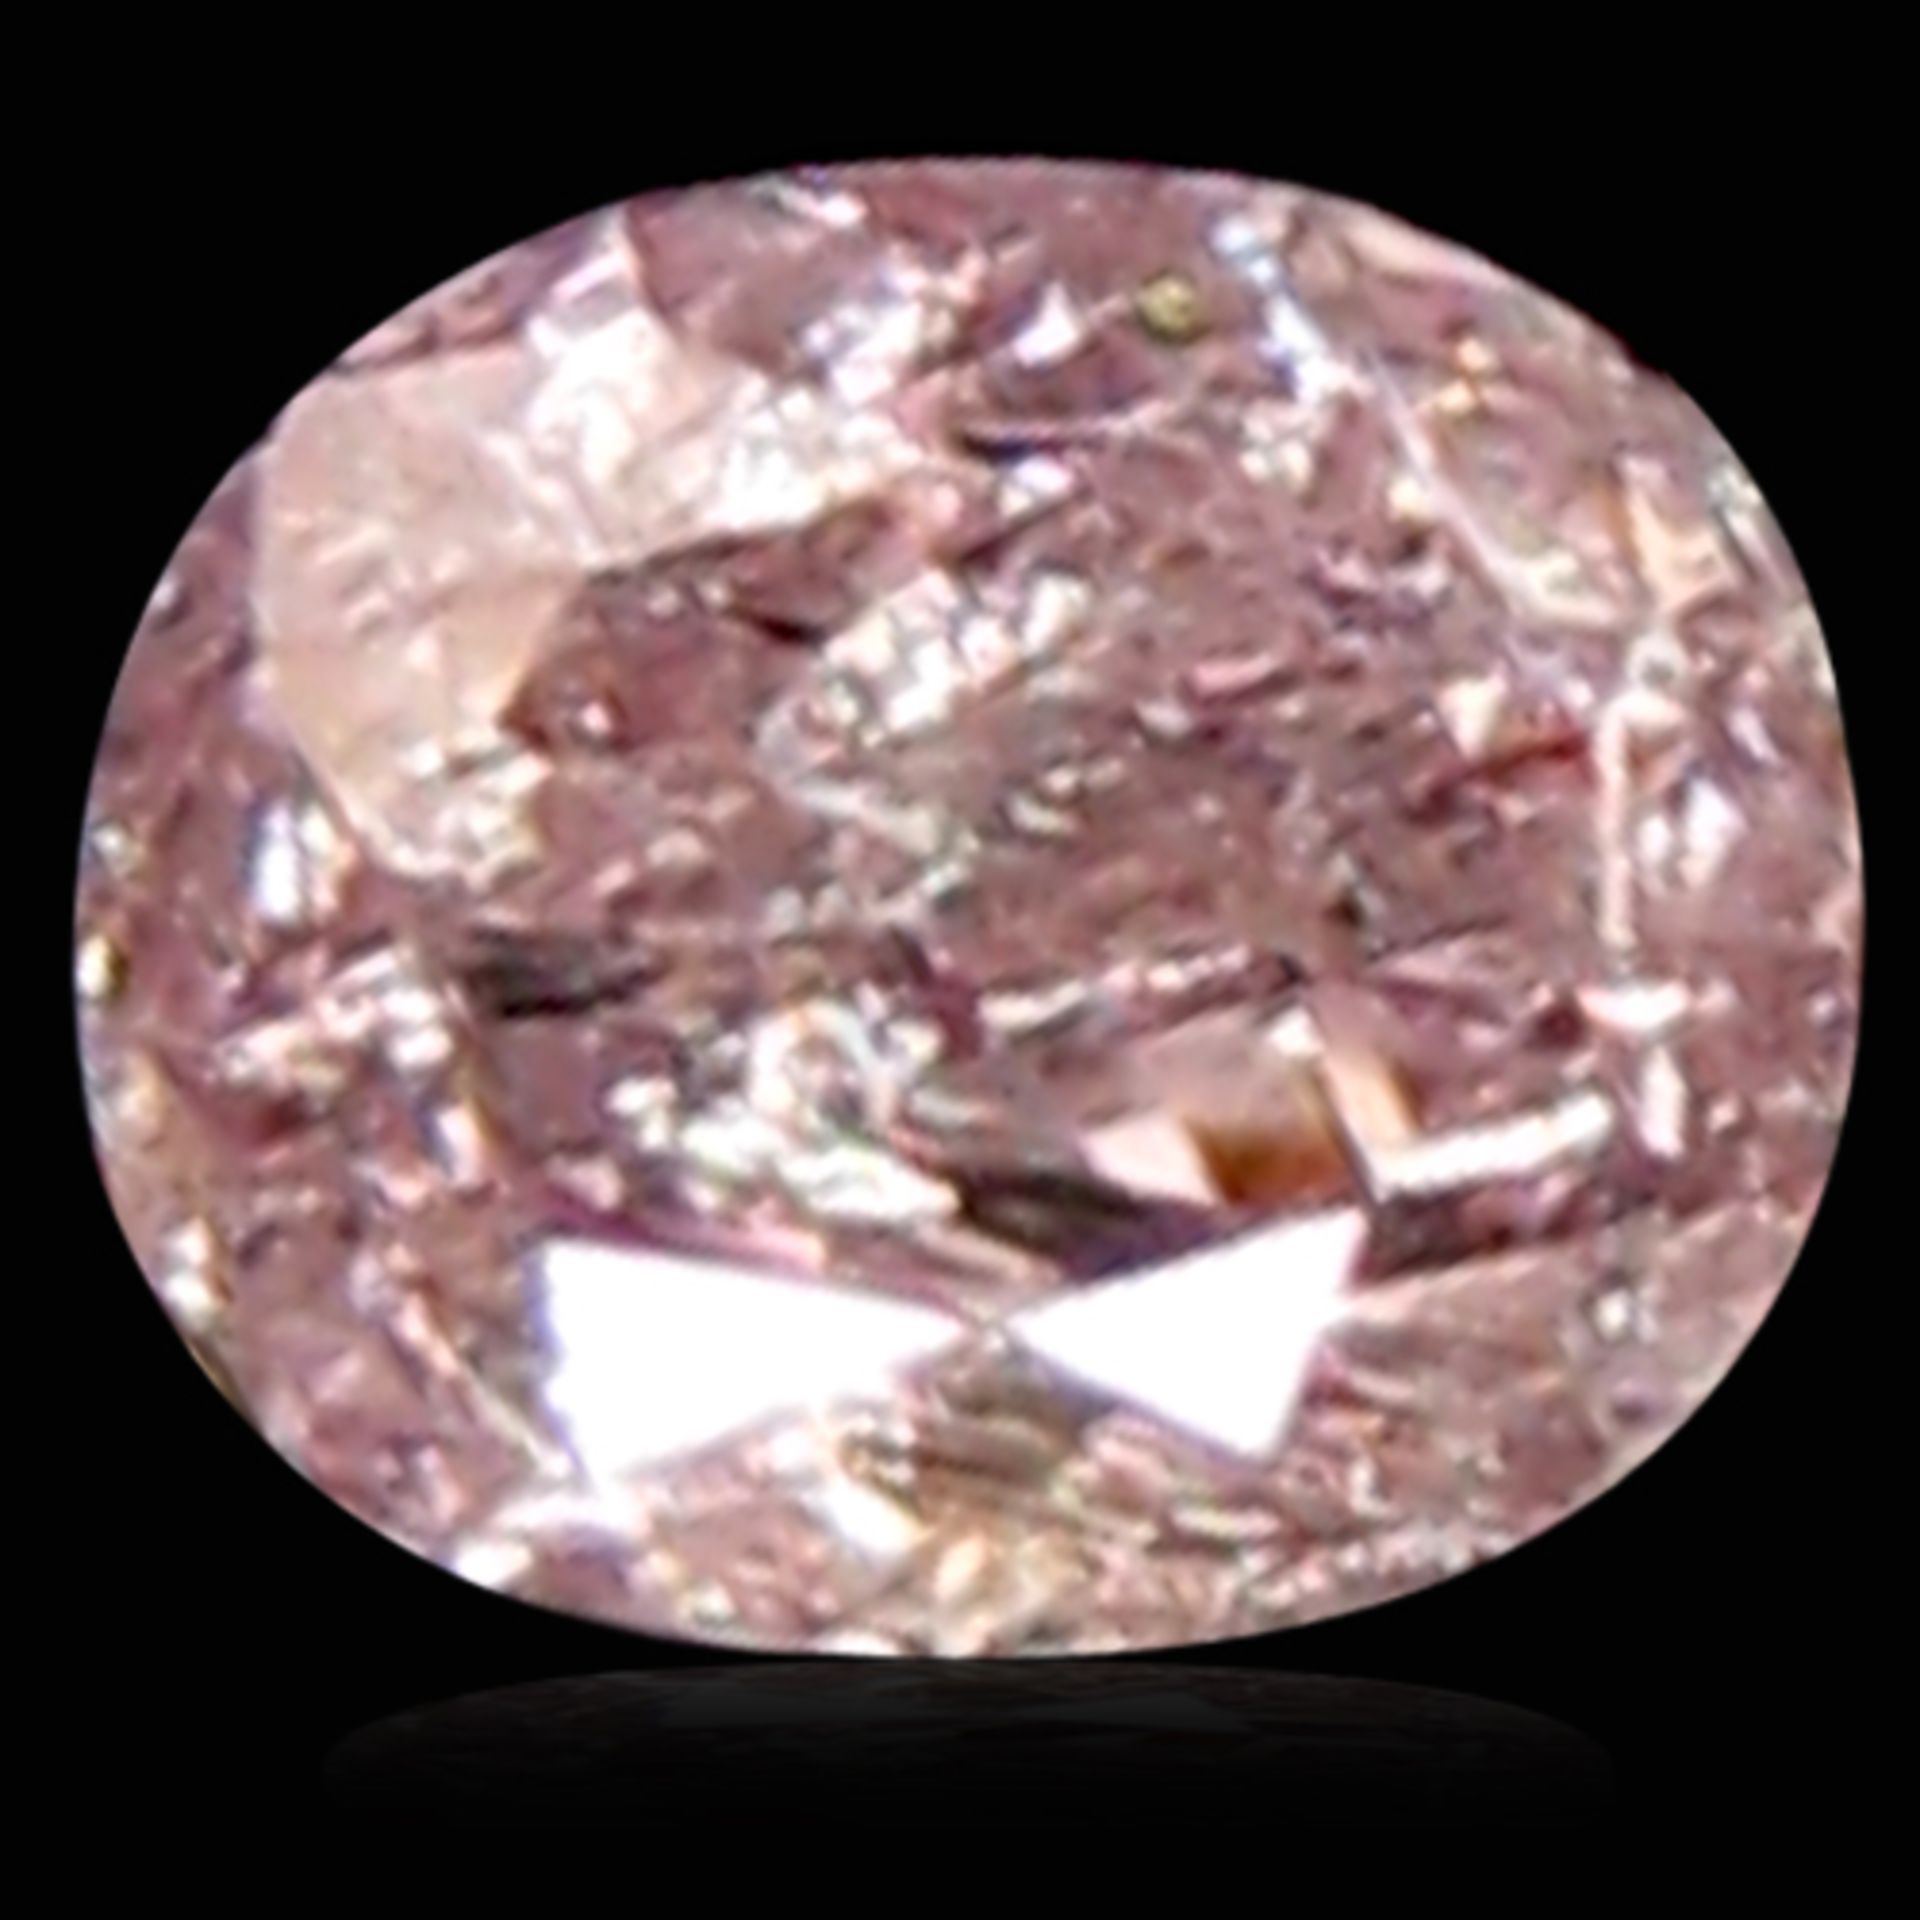 0.08ct Oval Cut Fancy Pink Diamond - Comes With Valuation Certificate - Gem Valued At $192.00 (